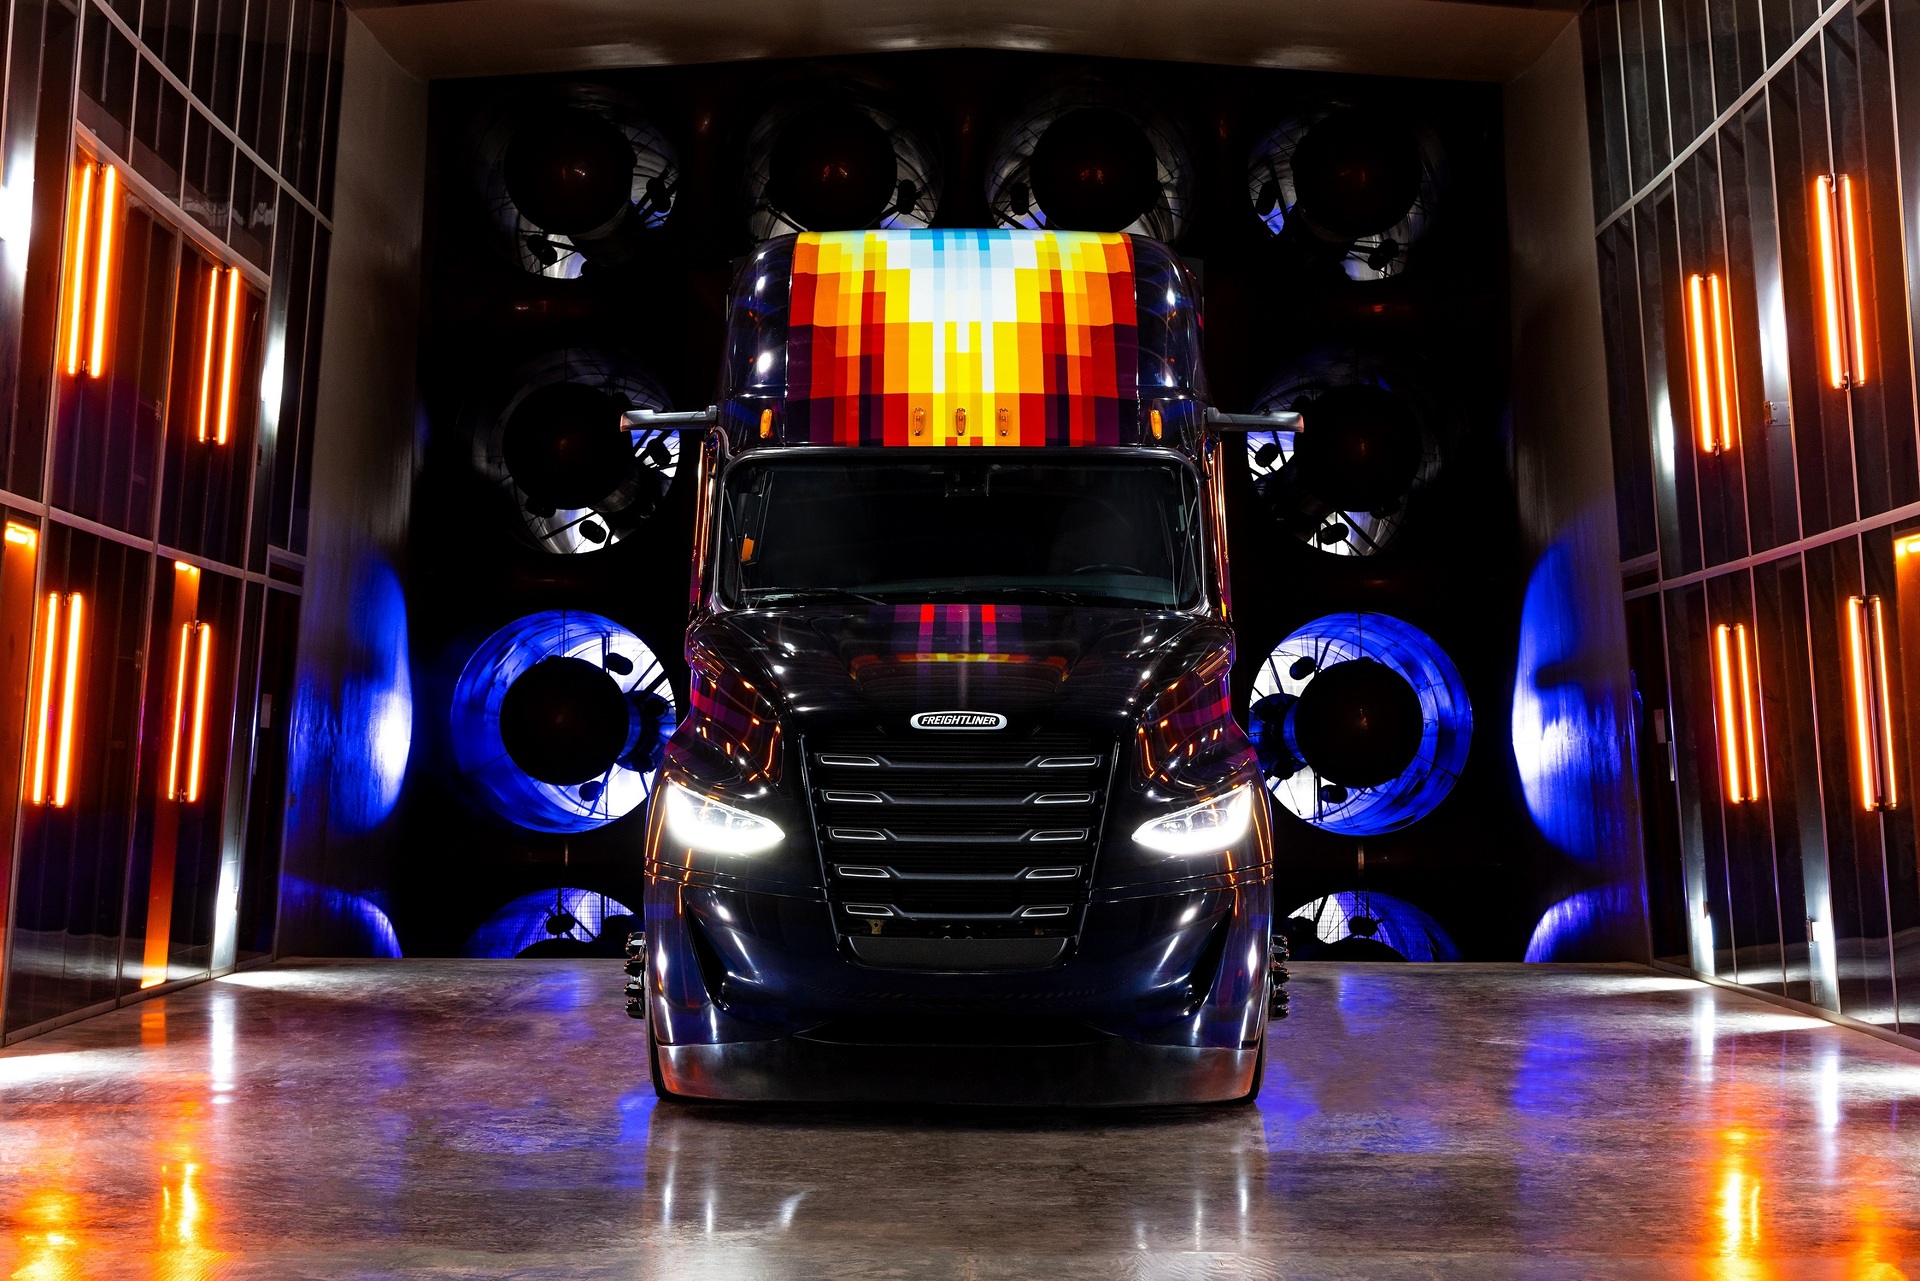 SuperTruck II technology could get to production - FreightWaves